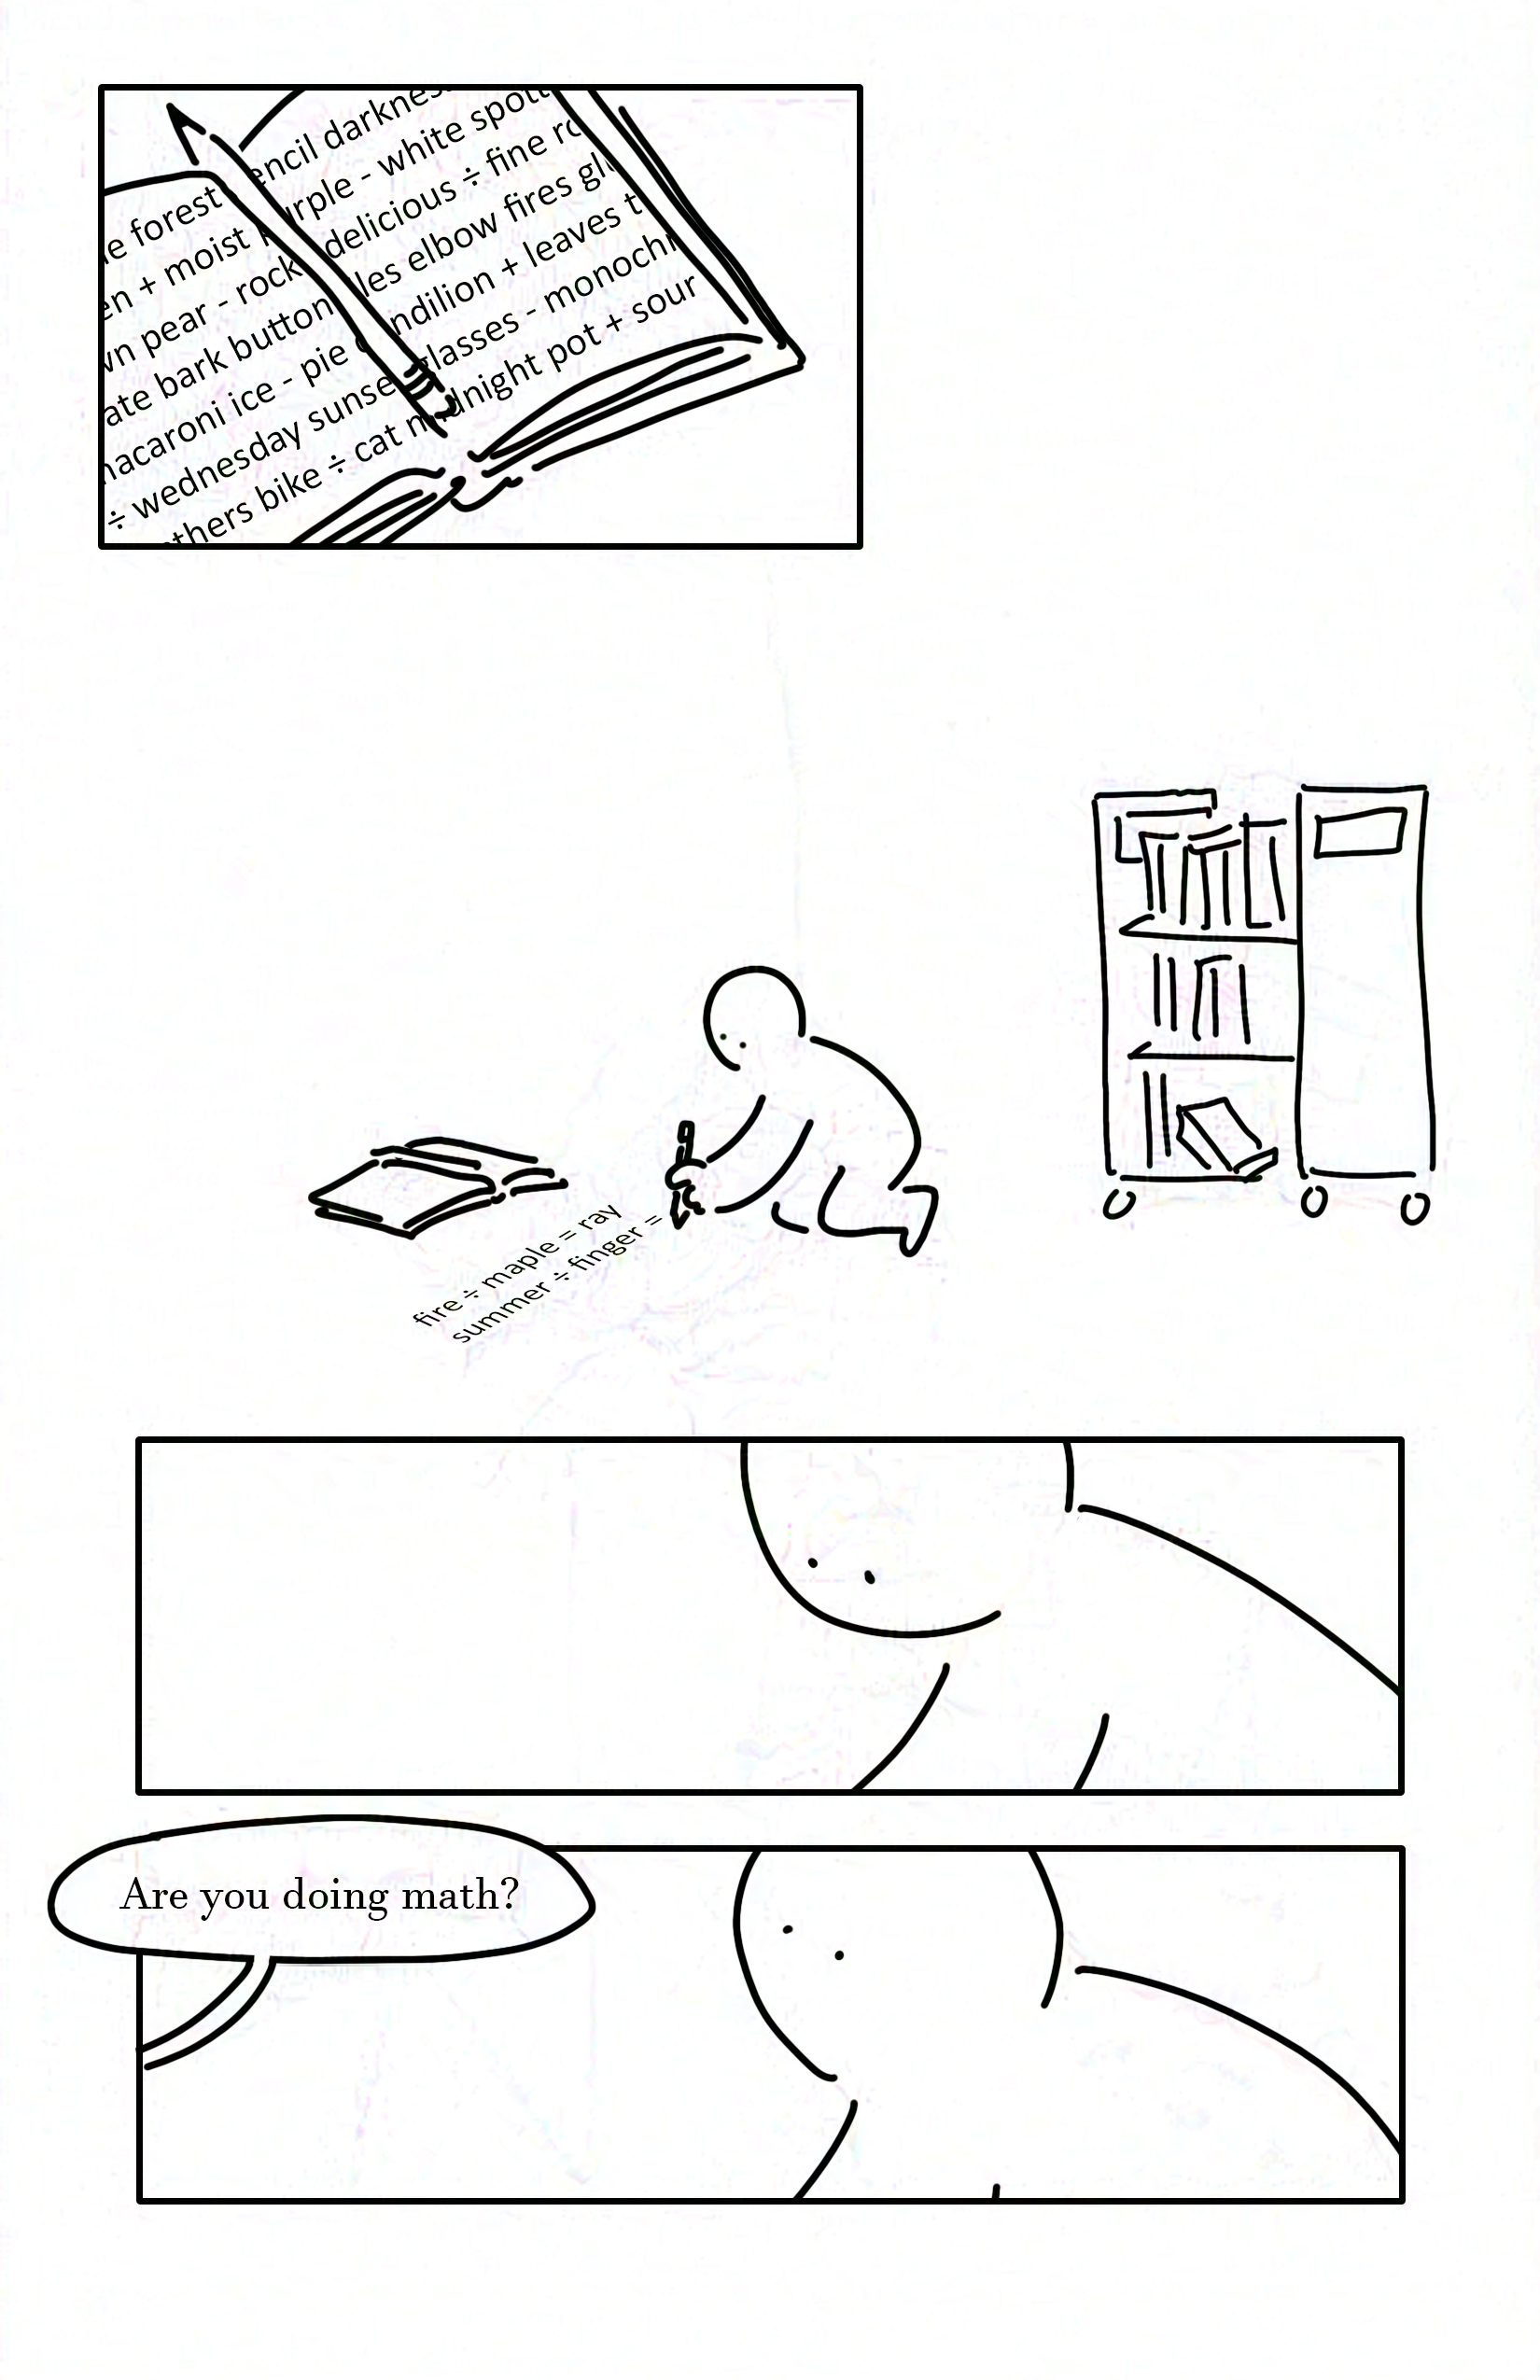 Black and white comic with simple drawings.
Panel 1: Open book with a pencil resting in the middle. The pages have nonsense text, with random words interspersed with plus, minus, and divide symbols.
Panel 2: A kid kneels writing on the ground with the book in front of them. Behind them is a library cart of books.
Panel 3: Close-up of the kid looking down as they write.
Panel 4: The kid looking up as someone says, "Are you doing math?"